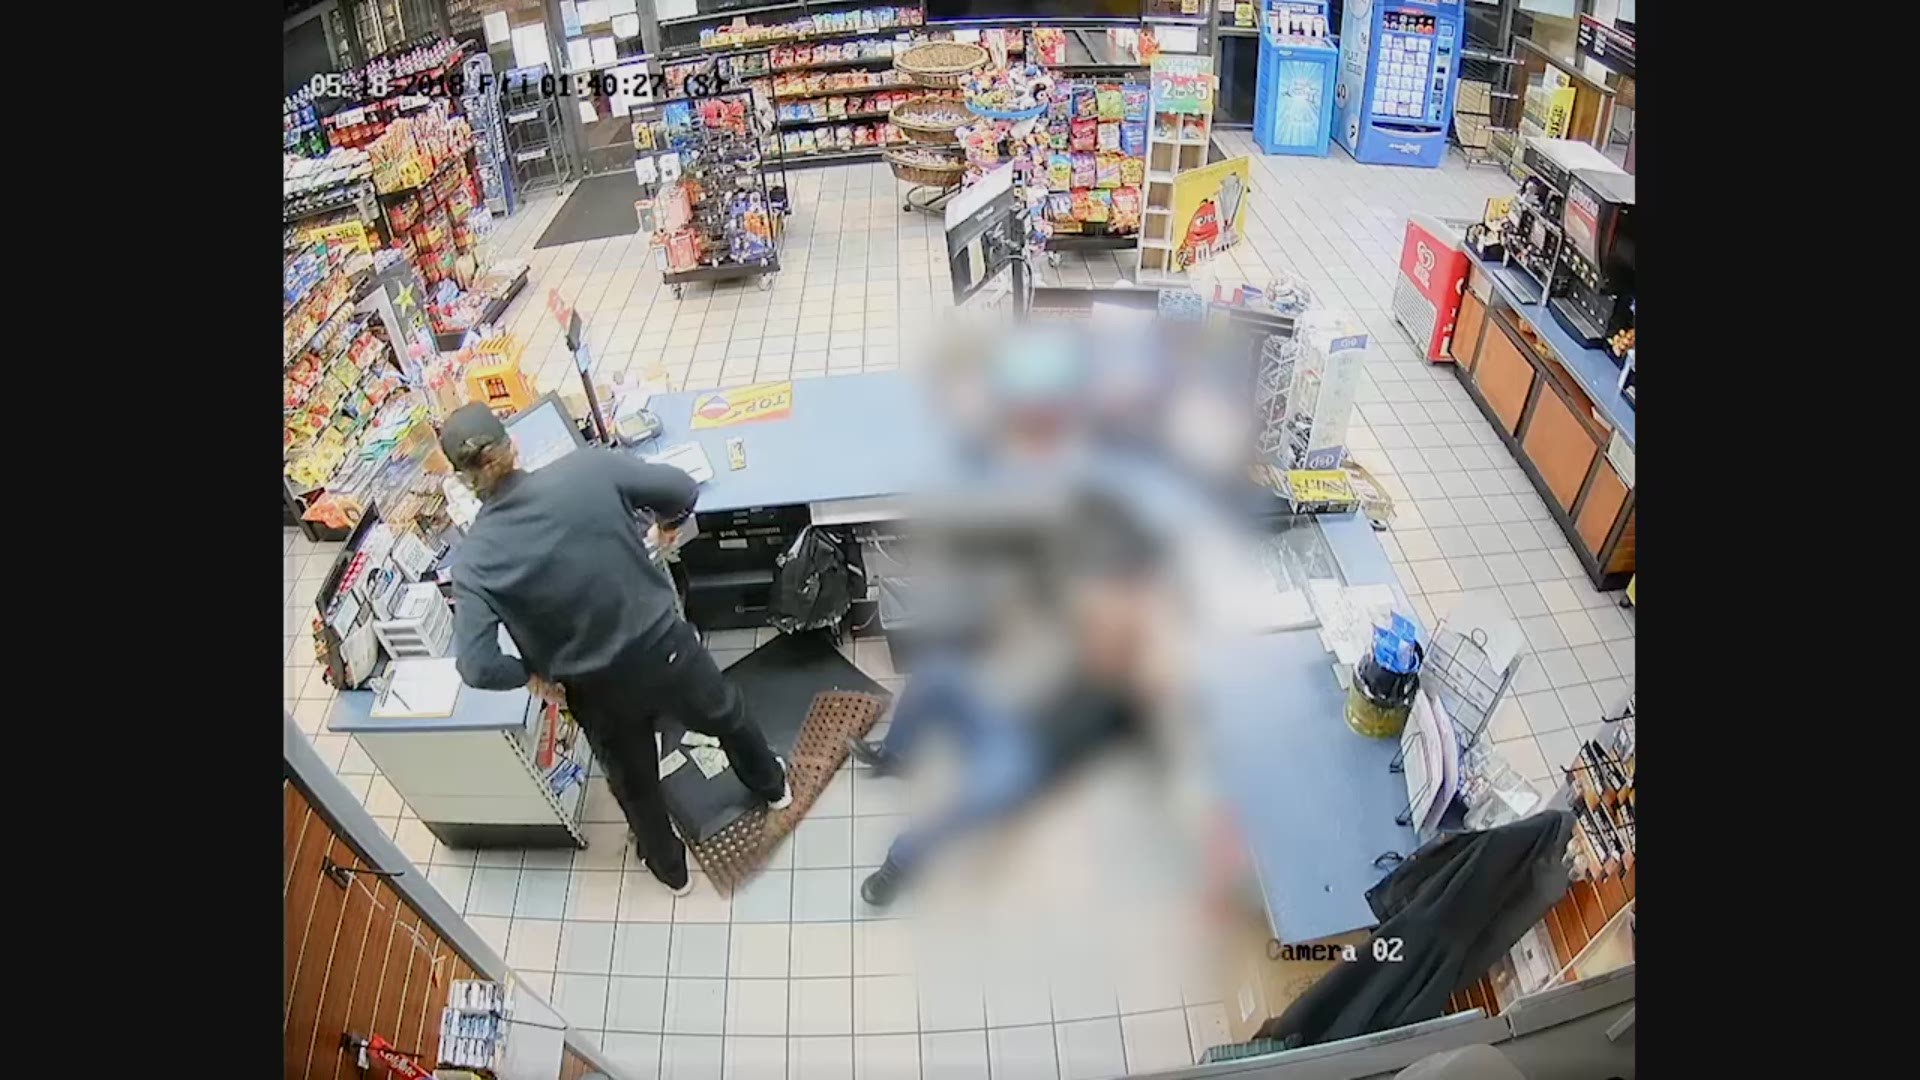 Suspect punches clerk on face to rob him.